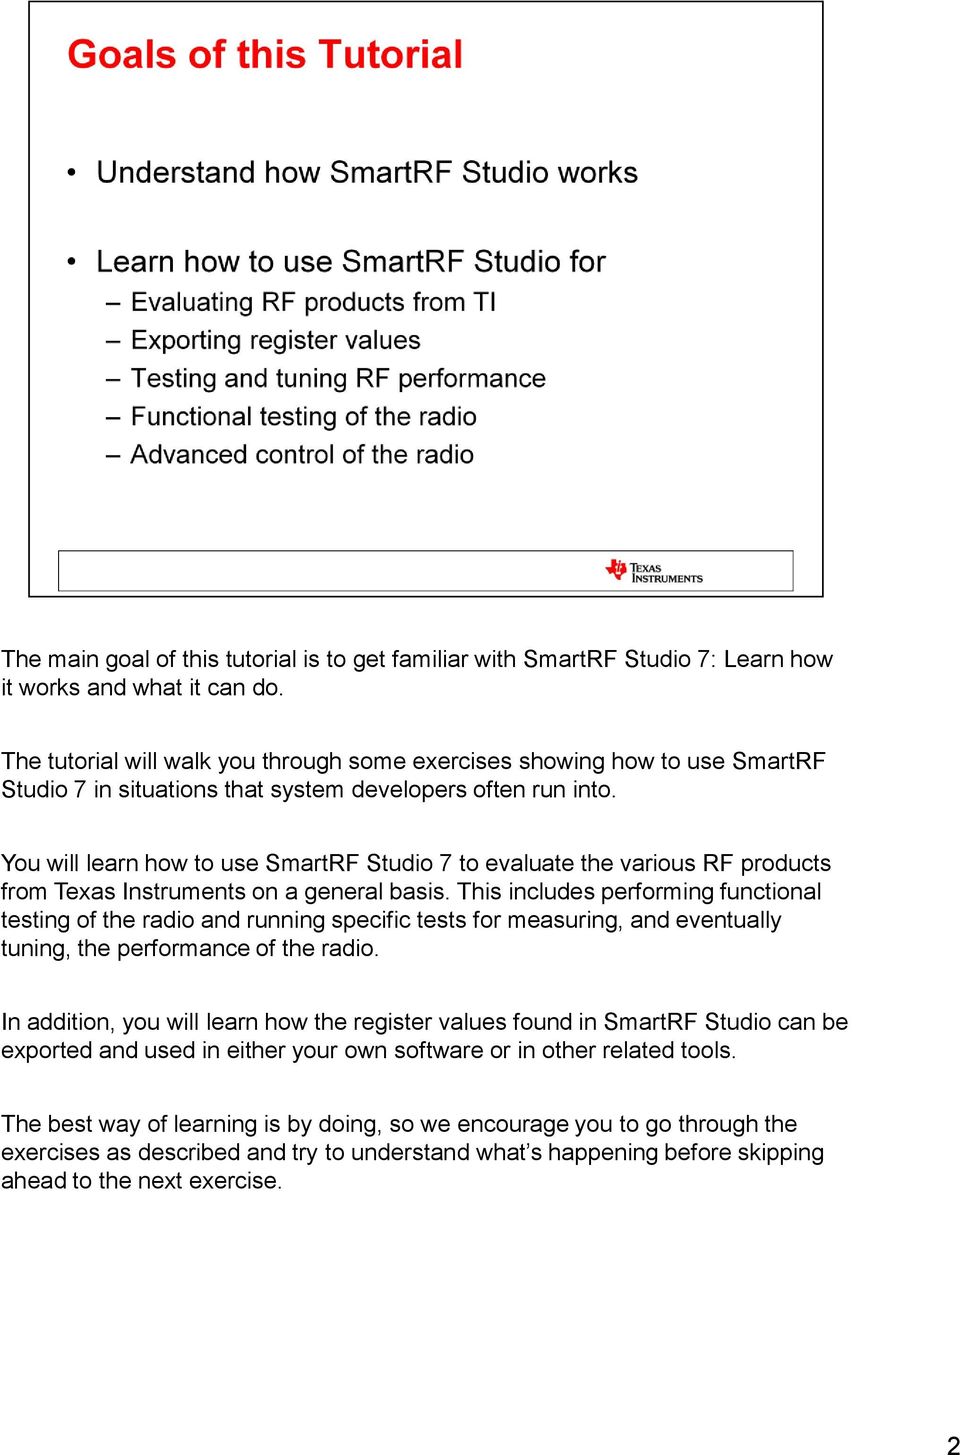 You will learn how to use SmartRF Studio 7 to evaluate the various RF products from Texas Instruments on a general basis.